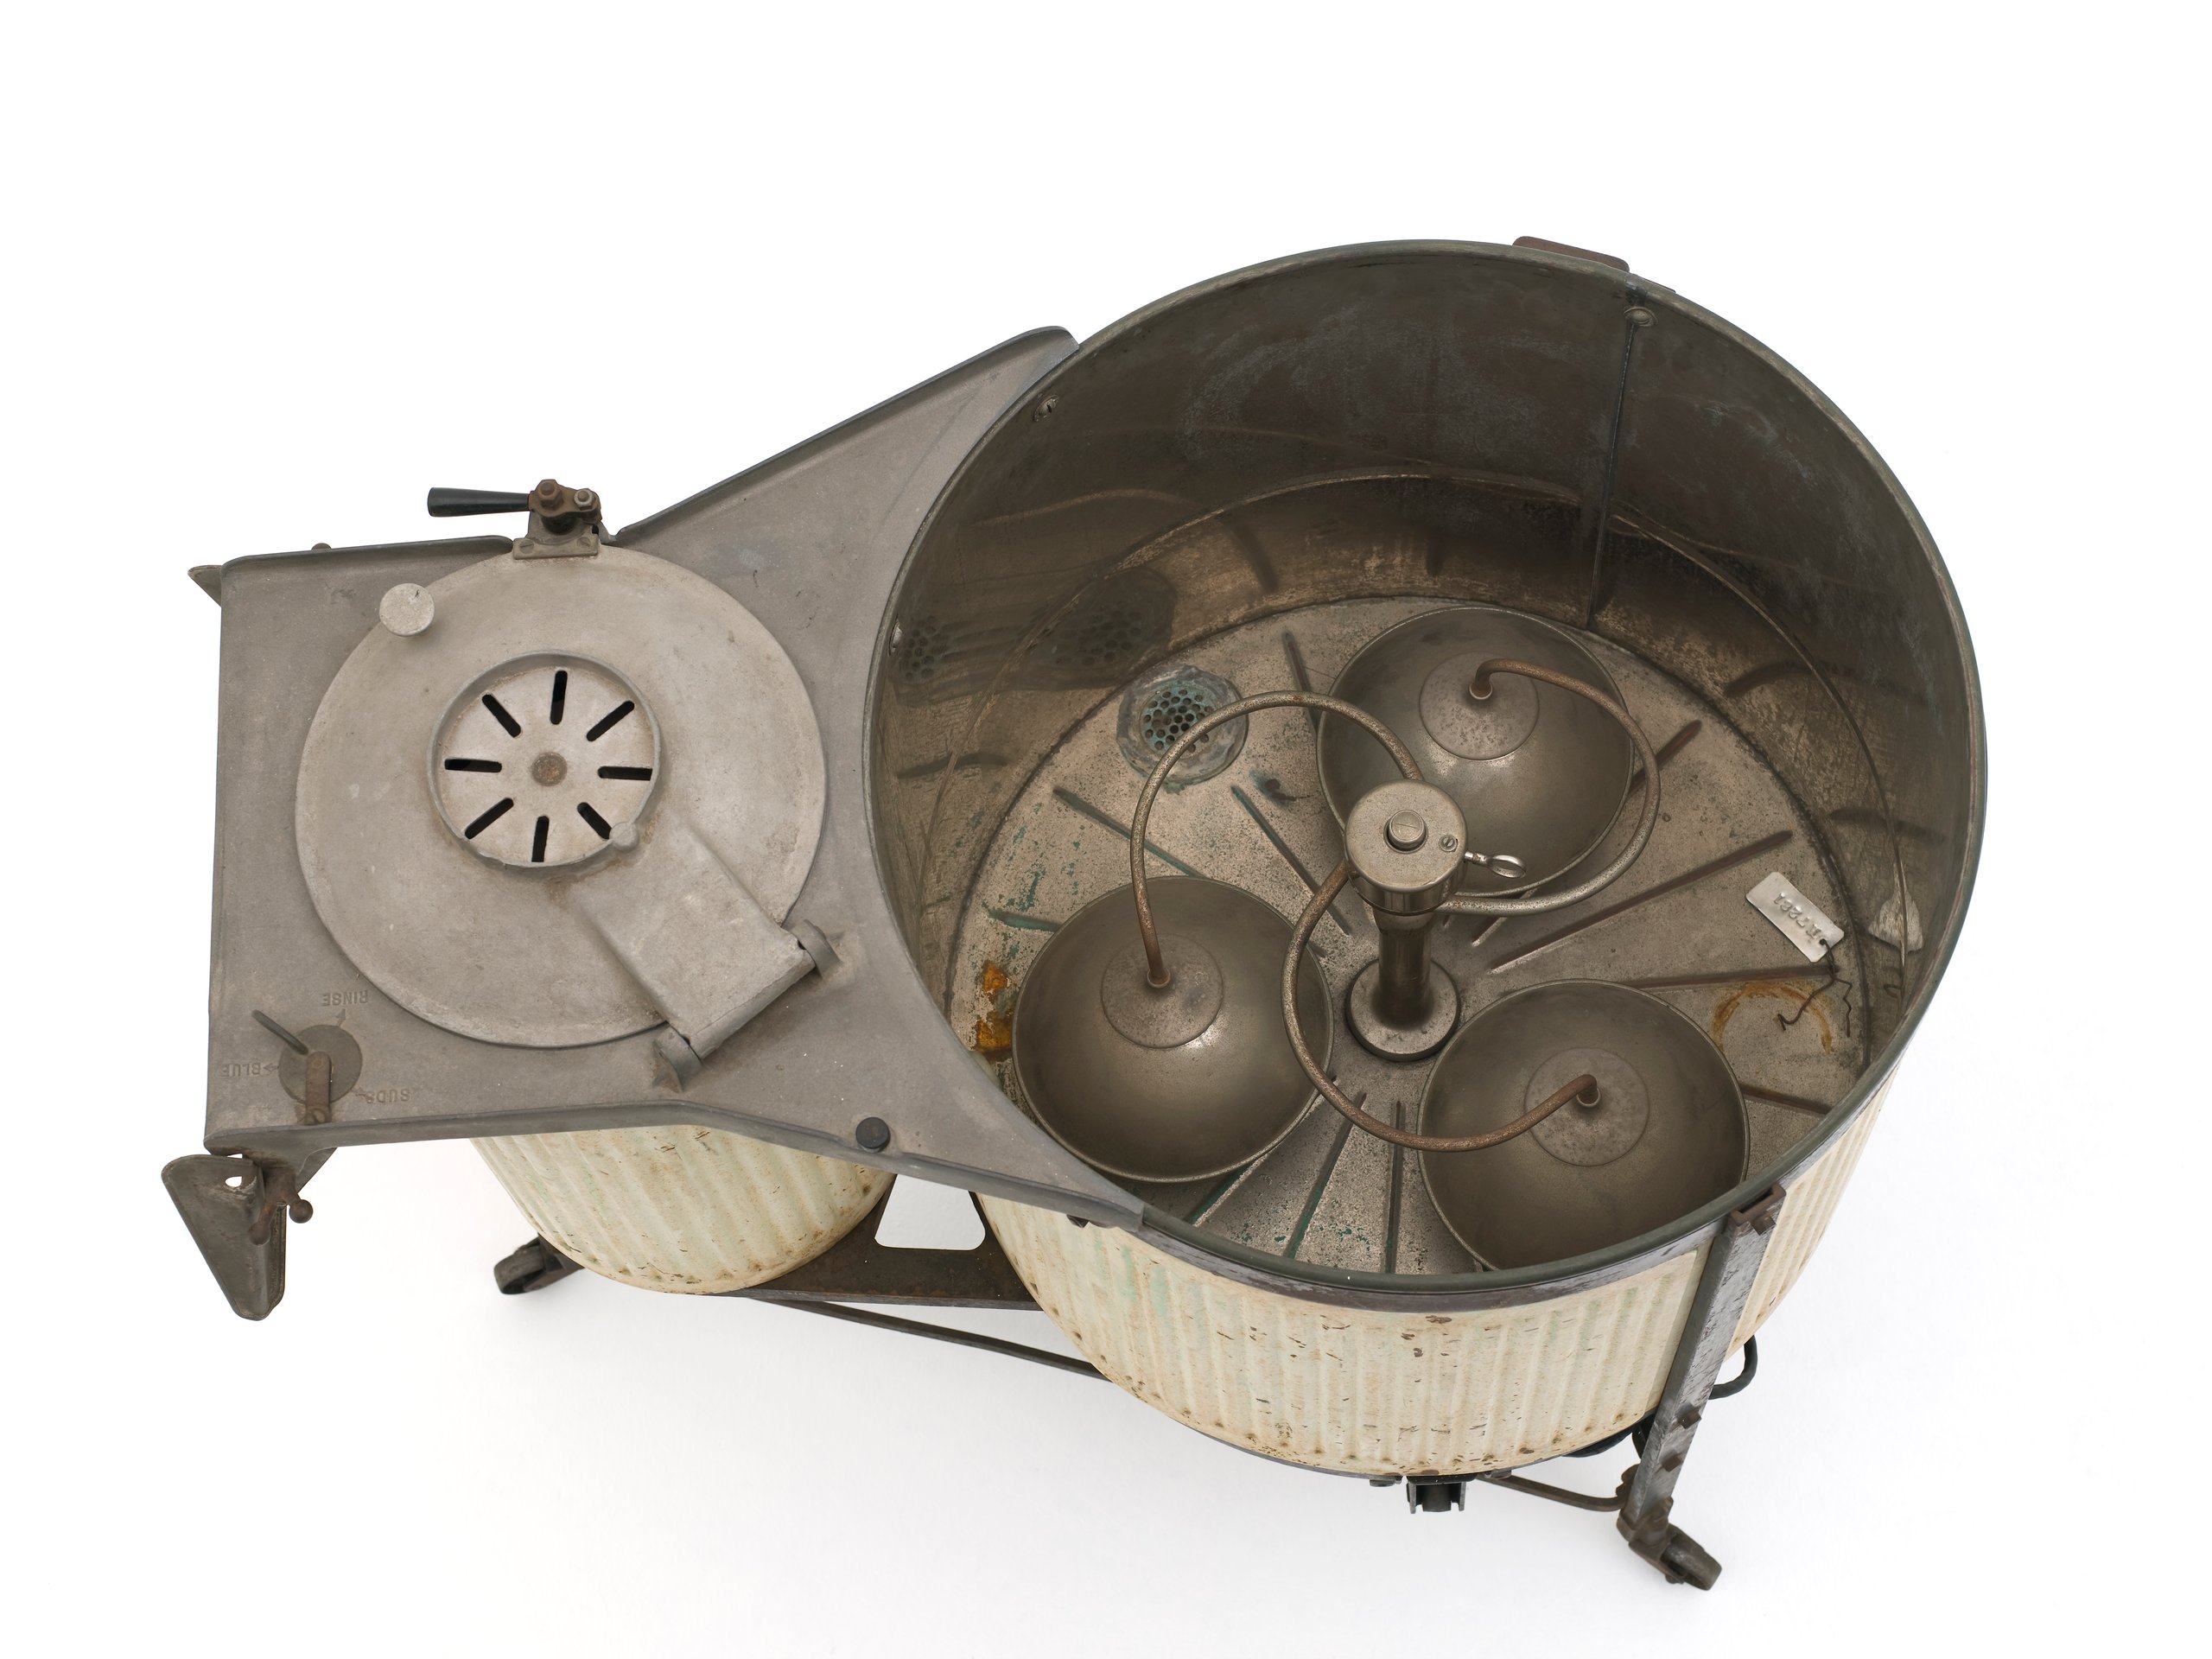 'Easy' electric washing machine made by Syracuse Washing Machine Corp., New York, USA, after 1912